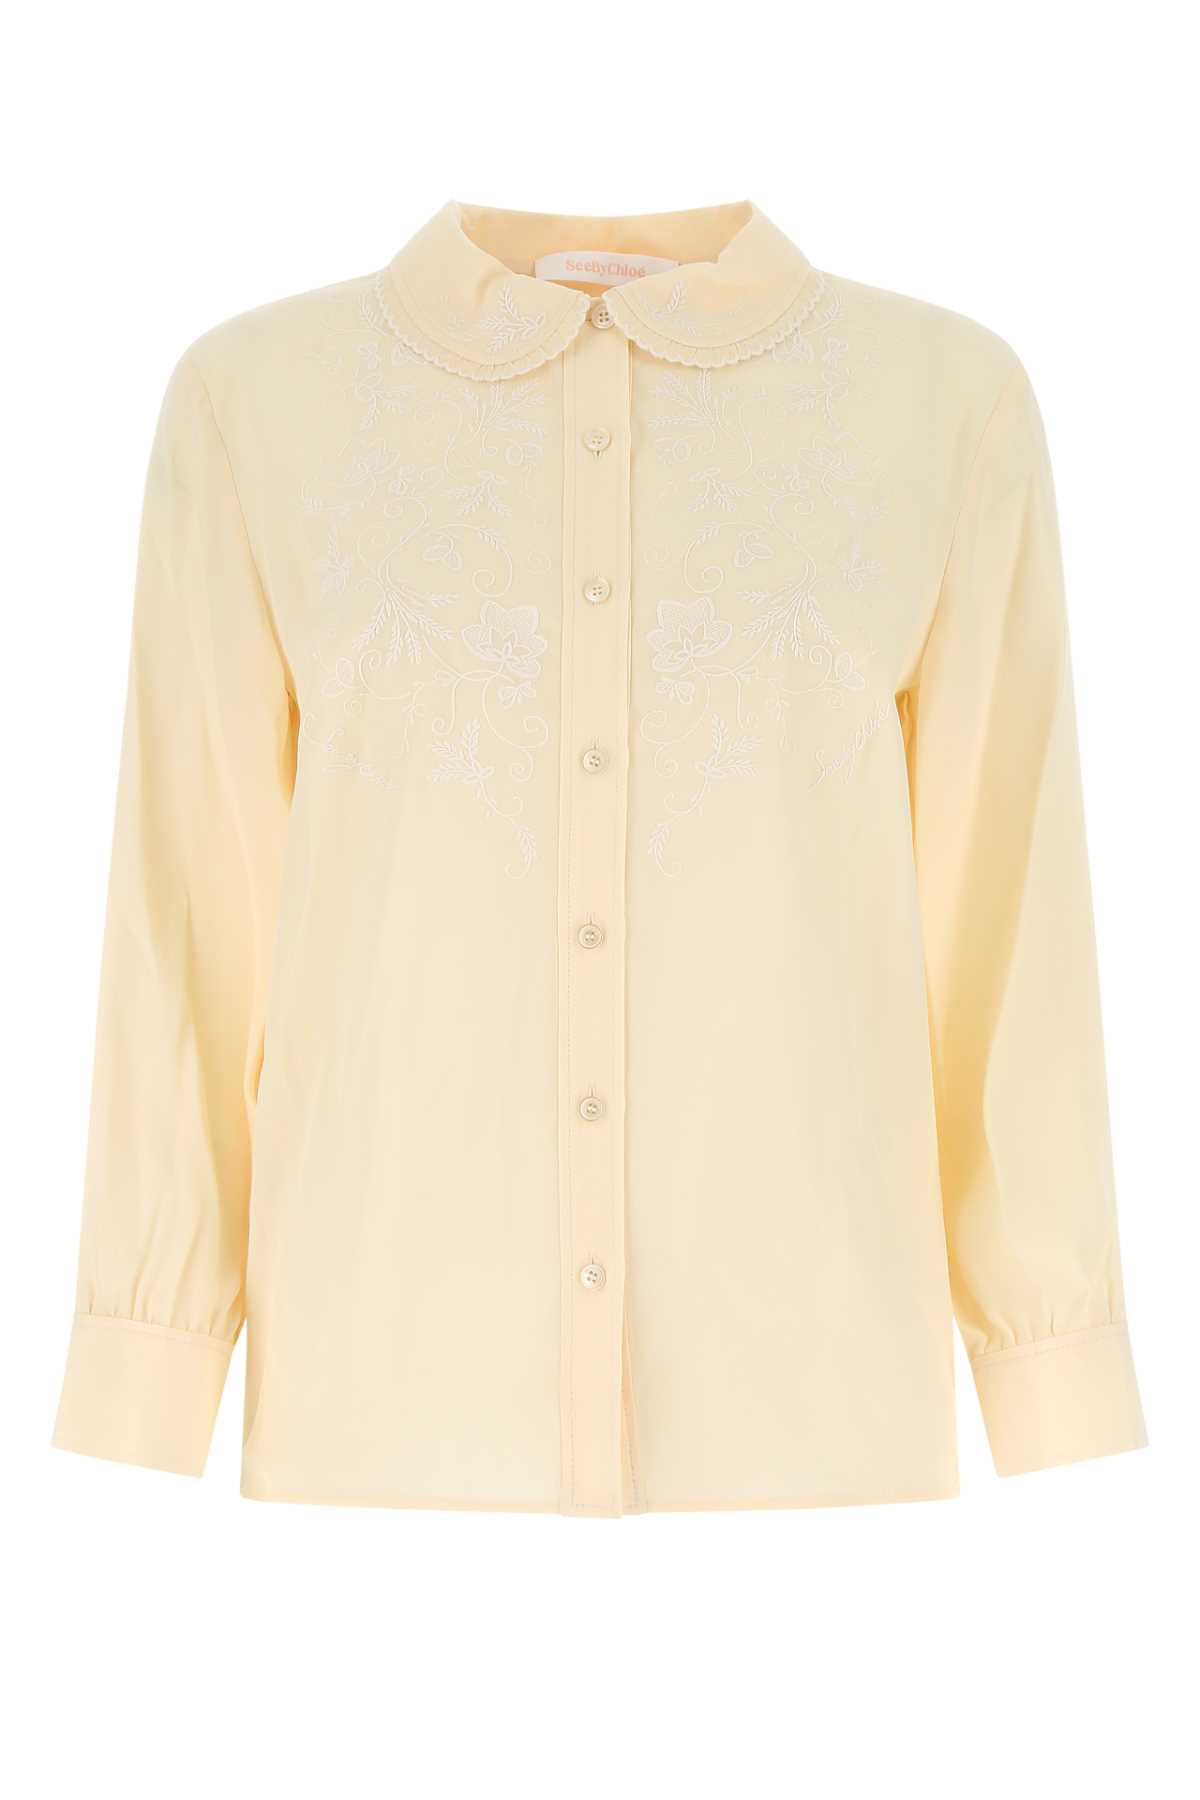 See by Chloé Skin Pink Crepe Shirt